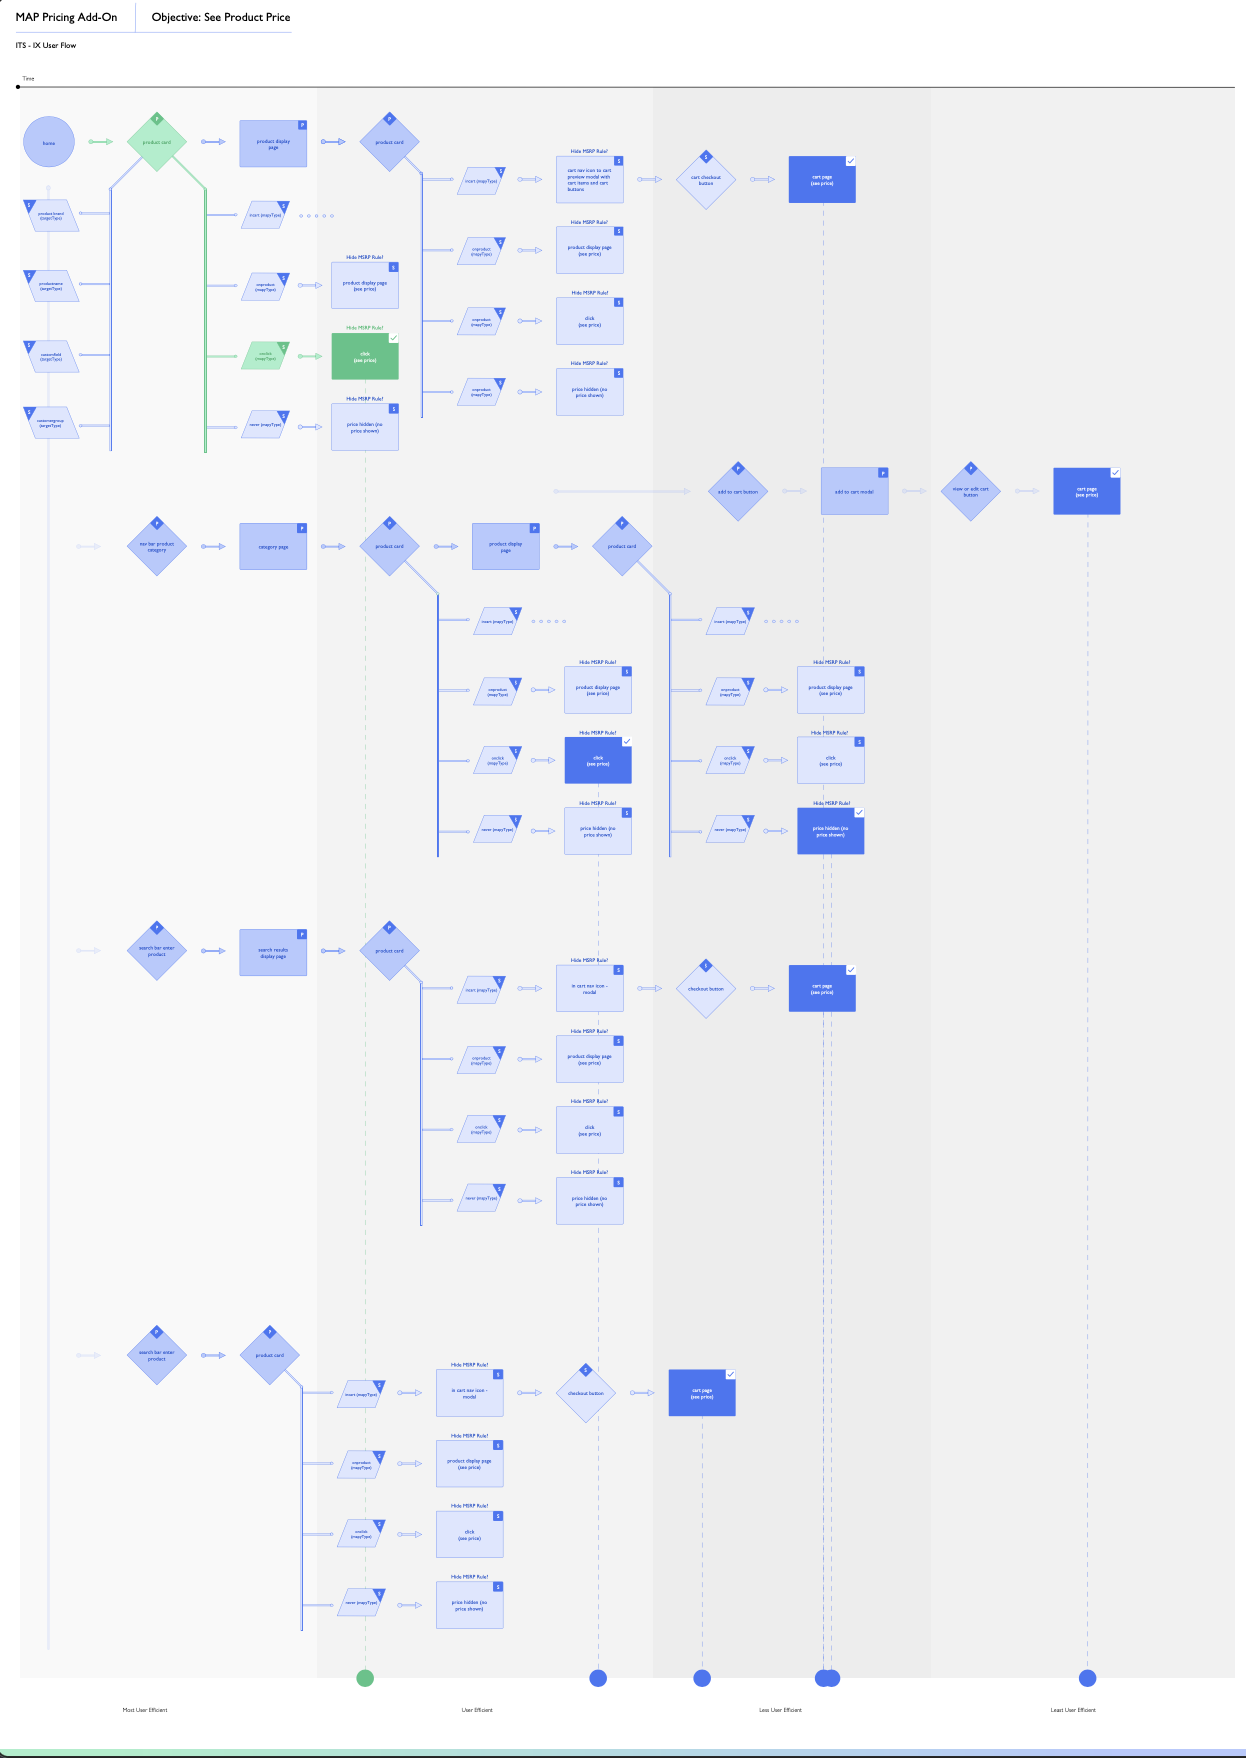 Static Image of Interaction Flow MAP Pricing ITS Add-On Image